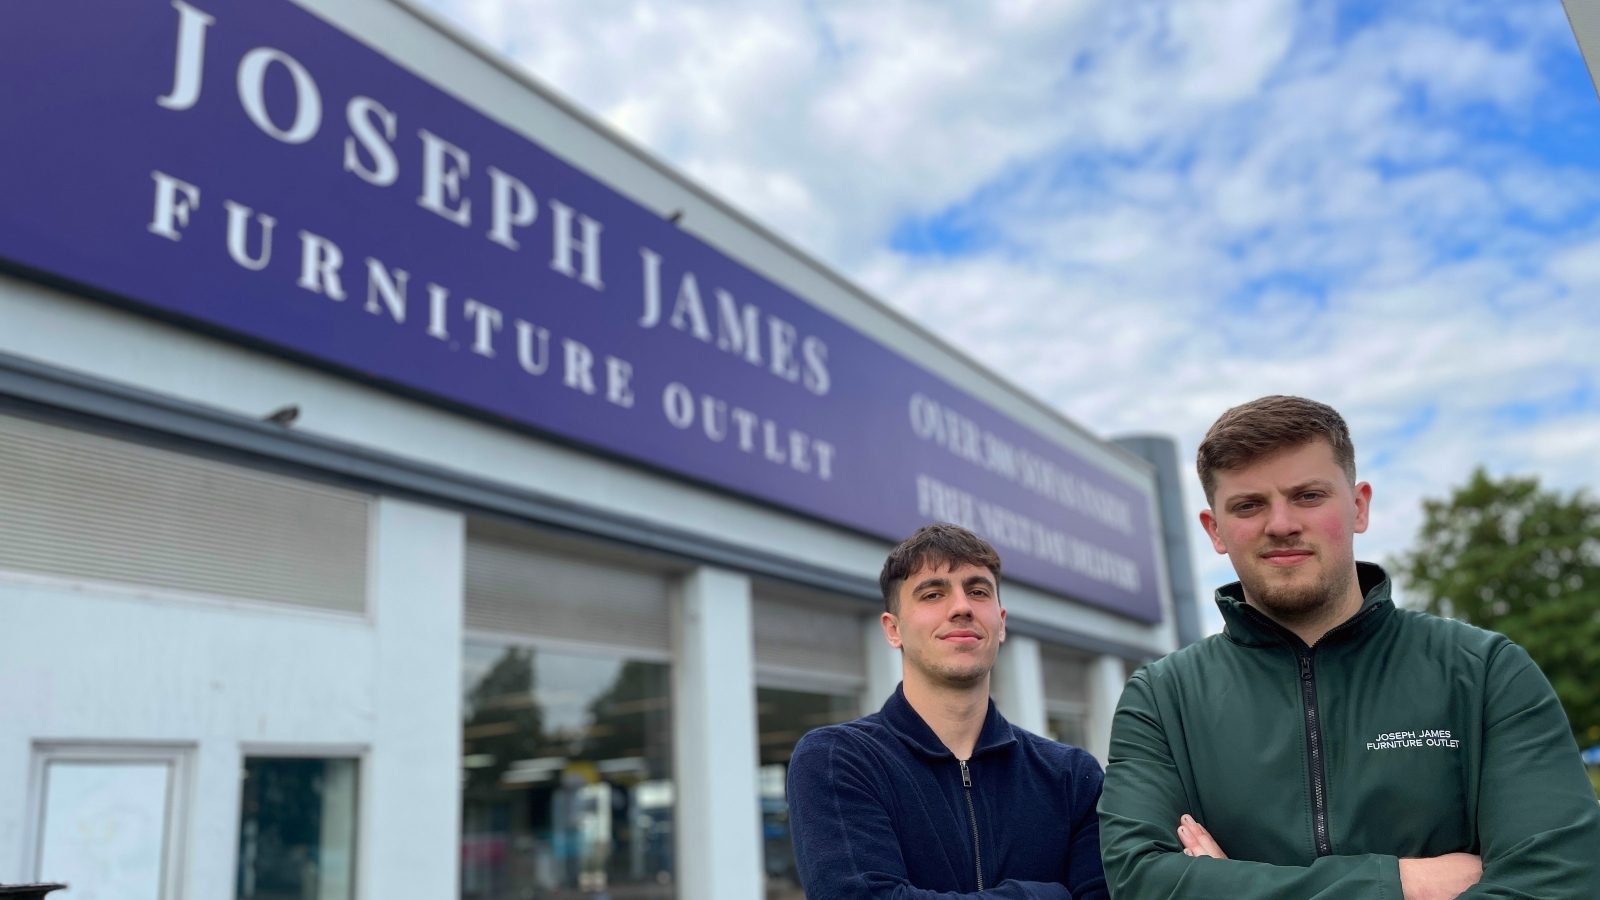 Joseph Shenton (left) and James Pullen outside the new shop in Stretford